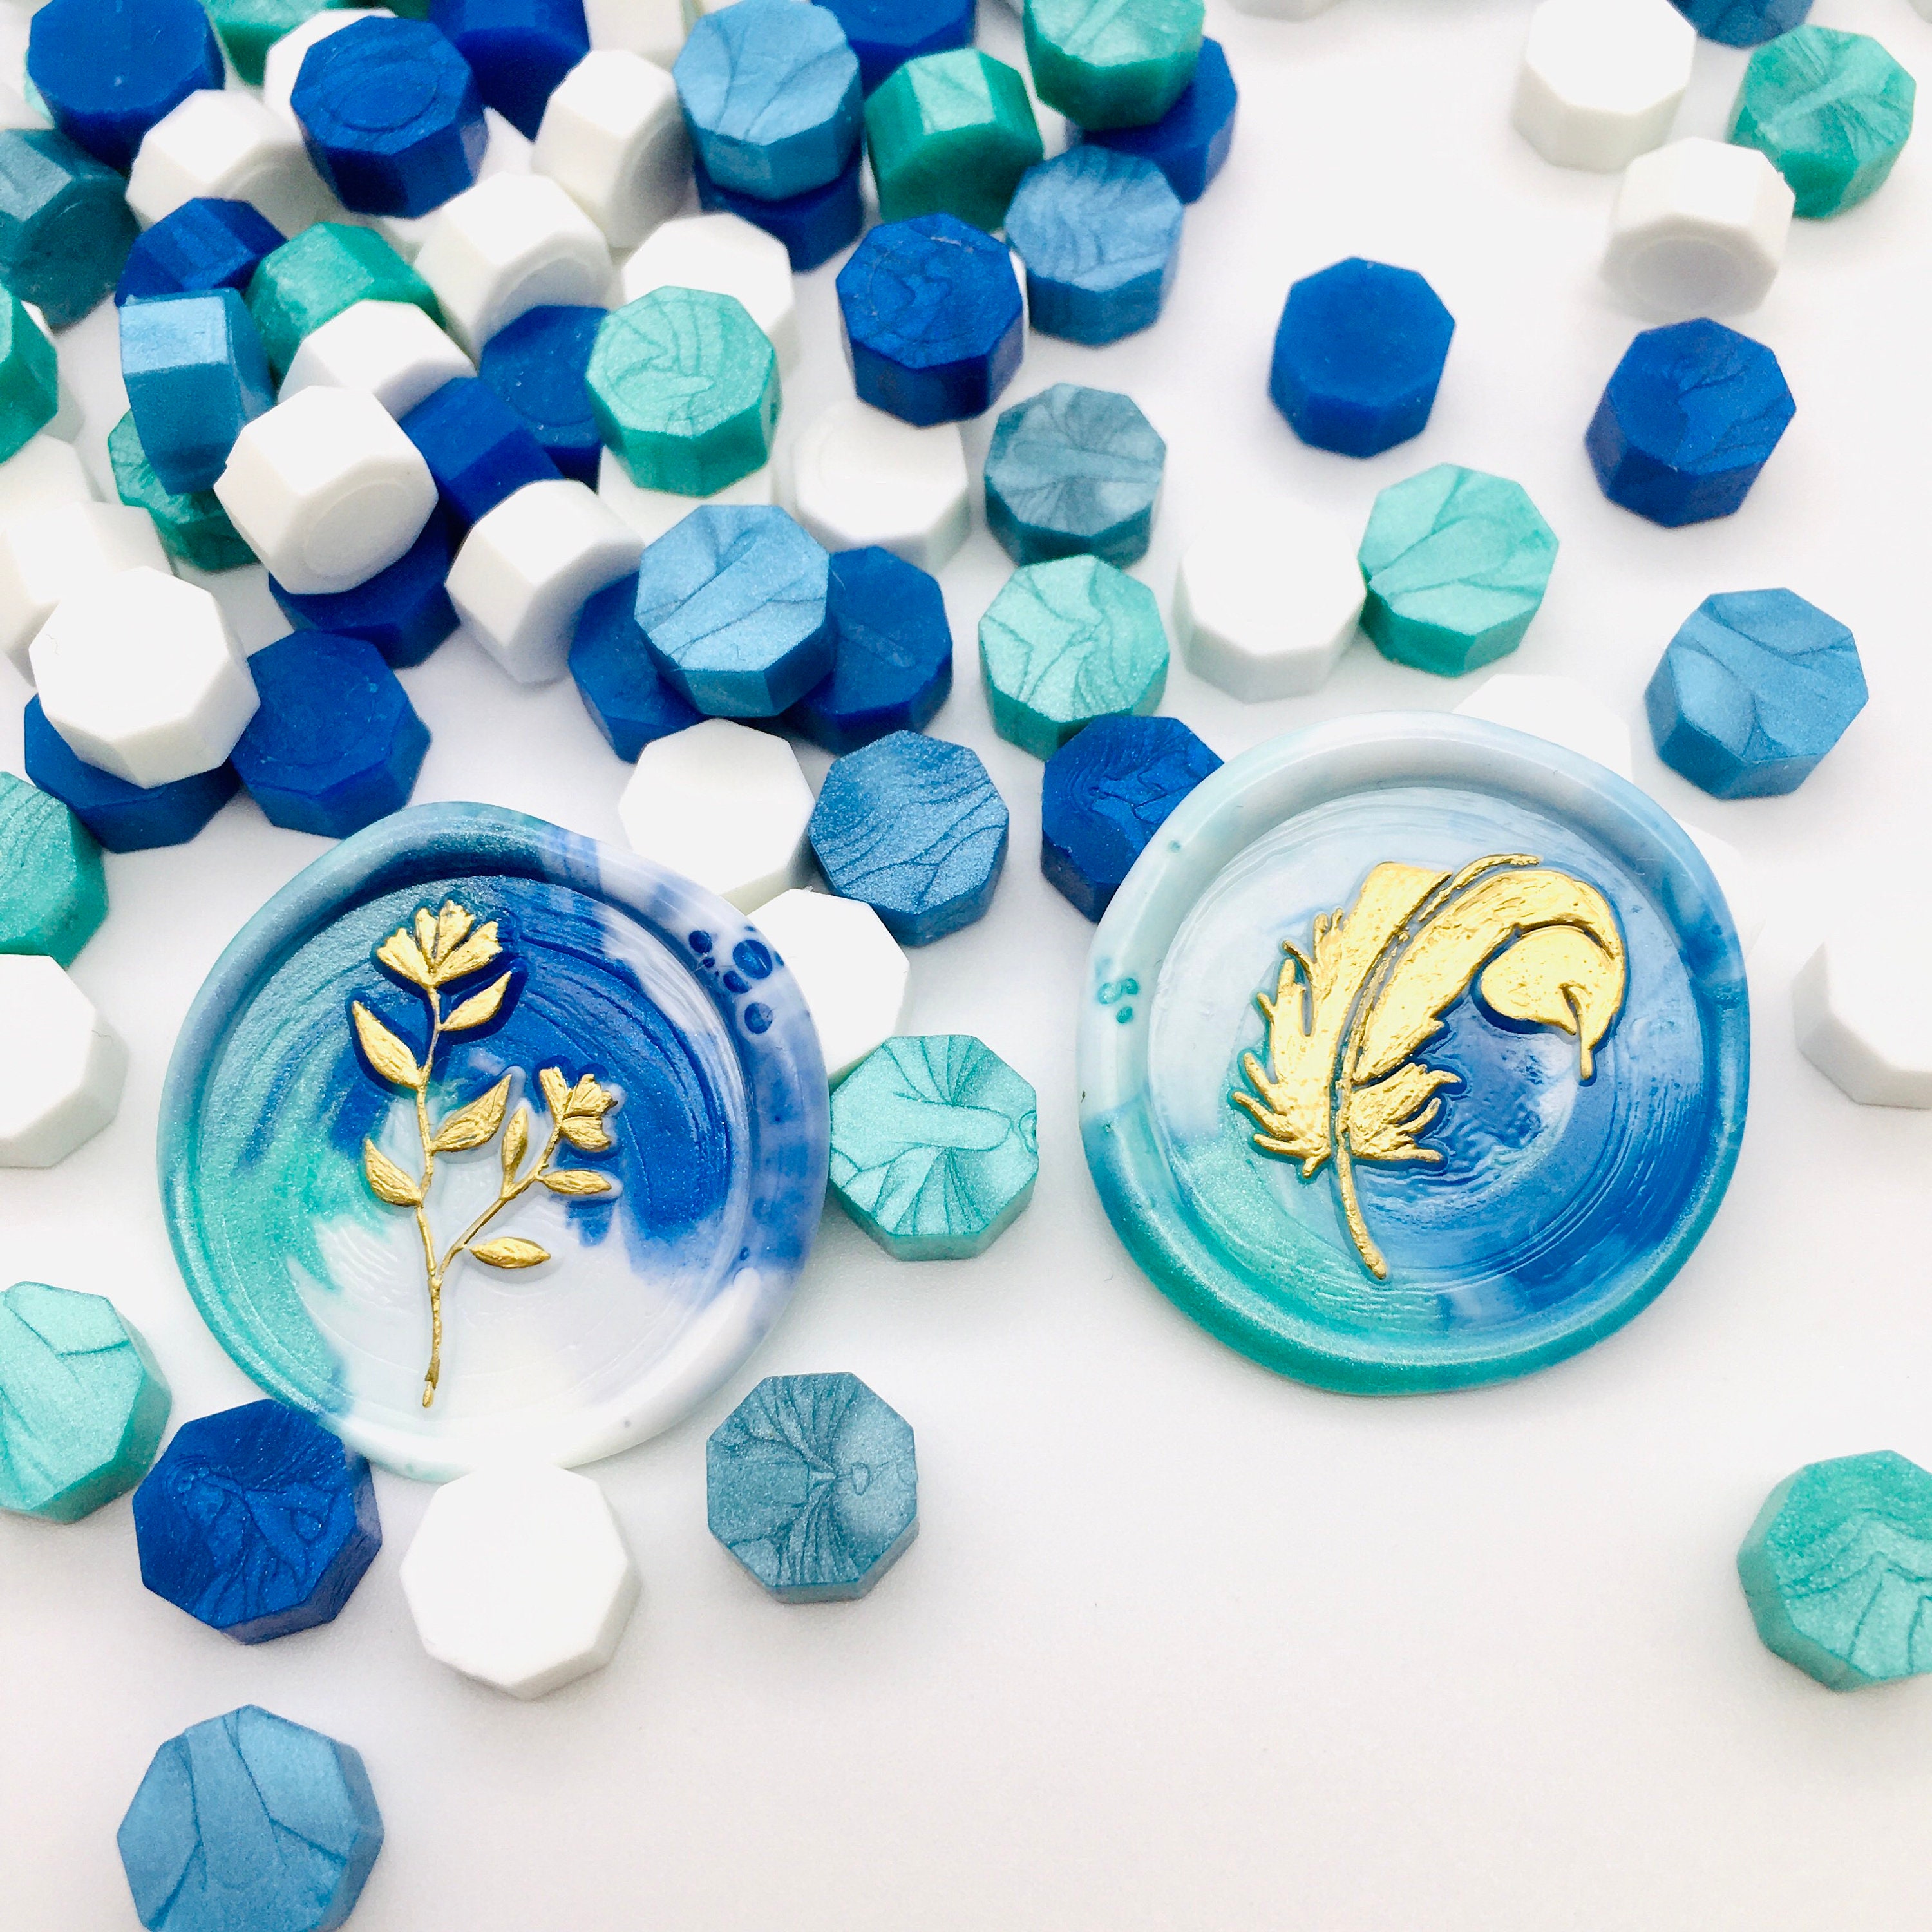 Mixed Wax Seal Beads, Blue and Silver Wax Beads